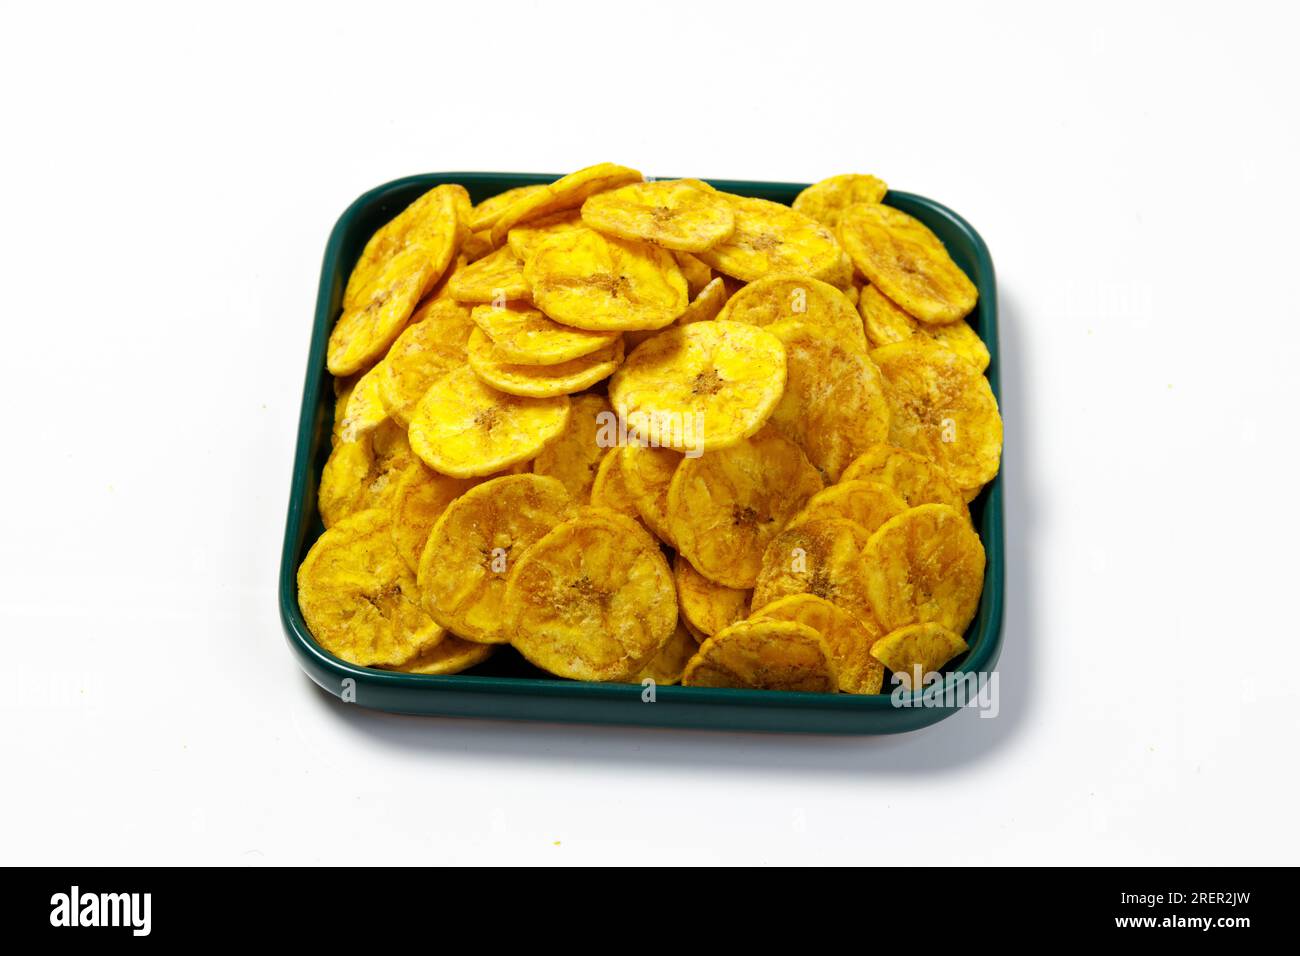 Kerala chips or Banana chips, cult snack item of Kerala, arranged in a green ceramic square shaped plate ,Isolated image with white background Stock Photo